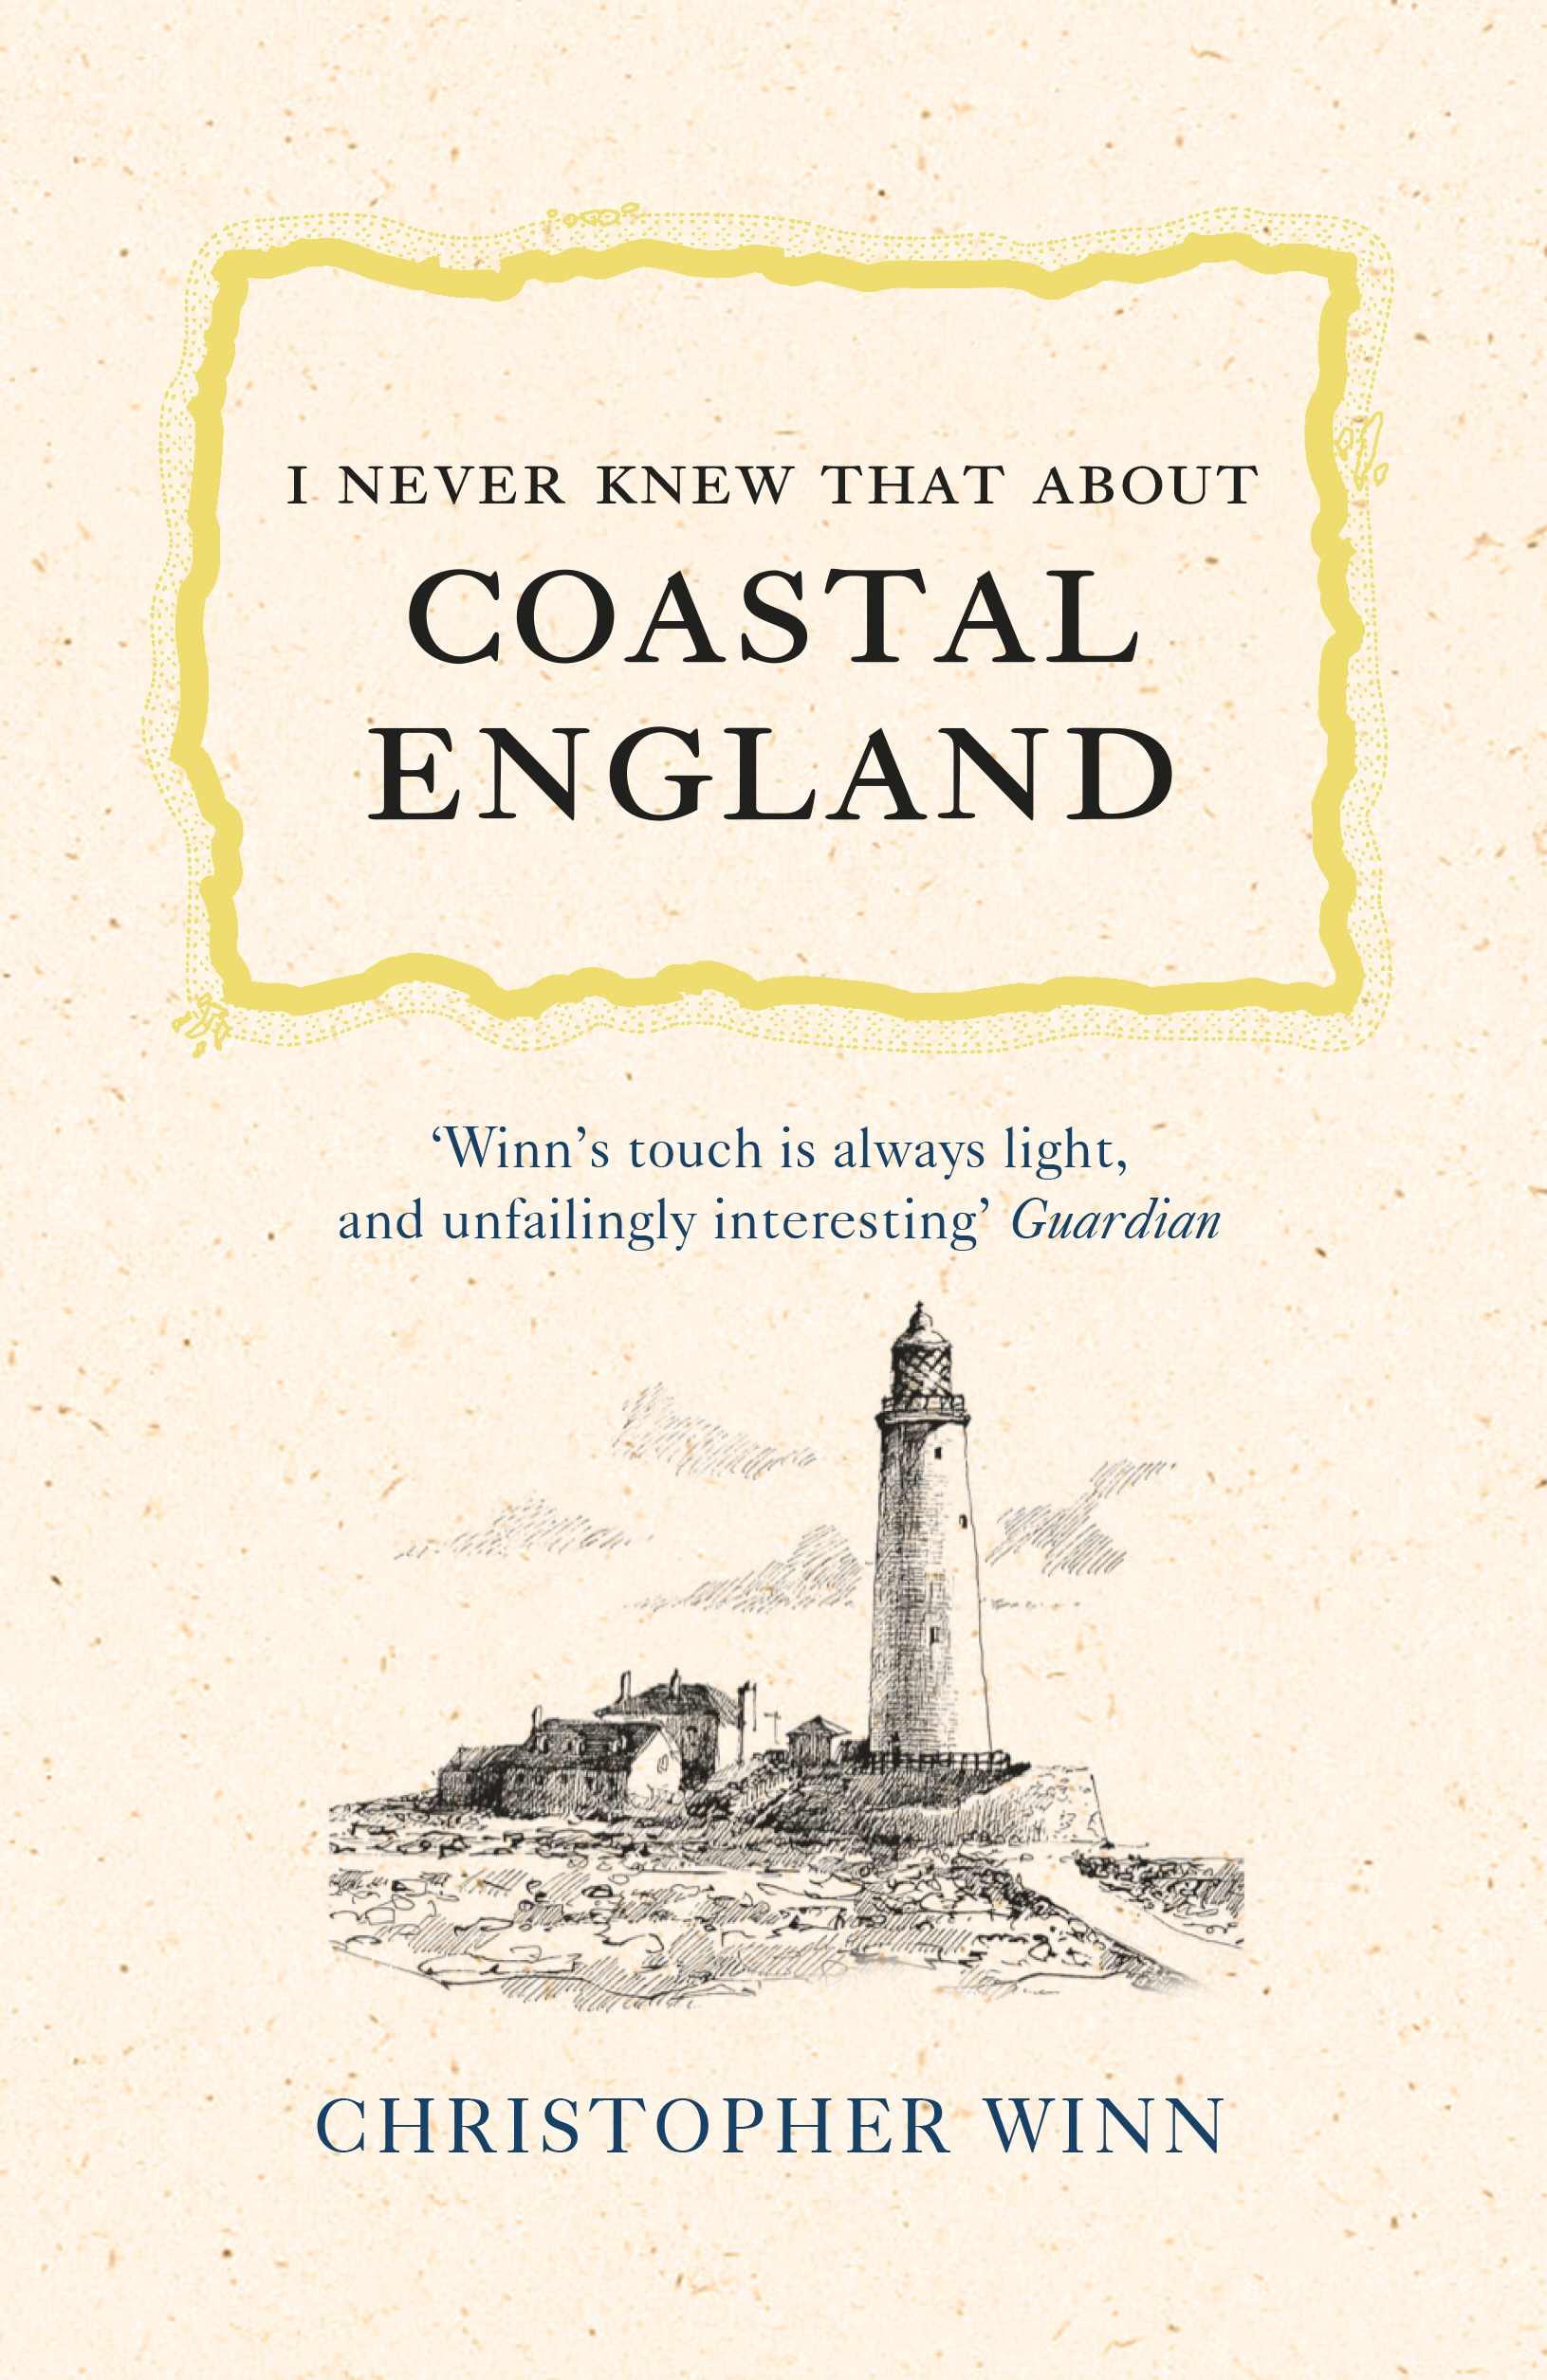 Book “I Never Knew That About Coastal England” by Christopher Winn — June 6, 2019